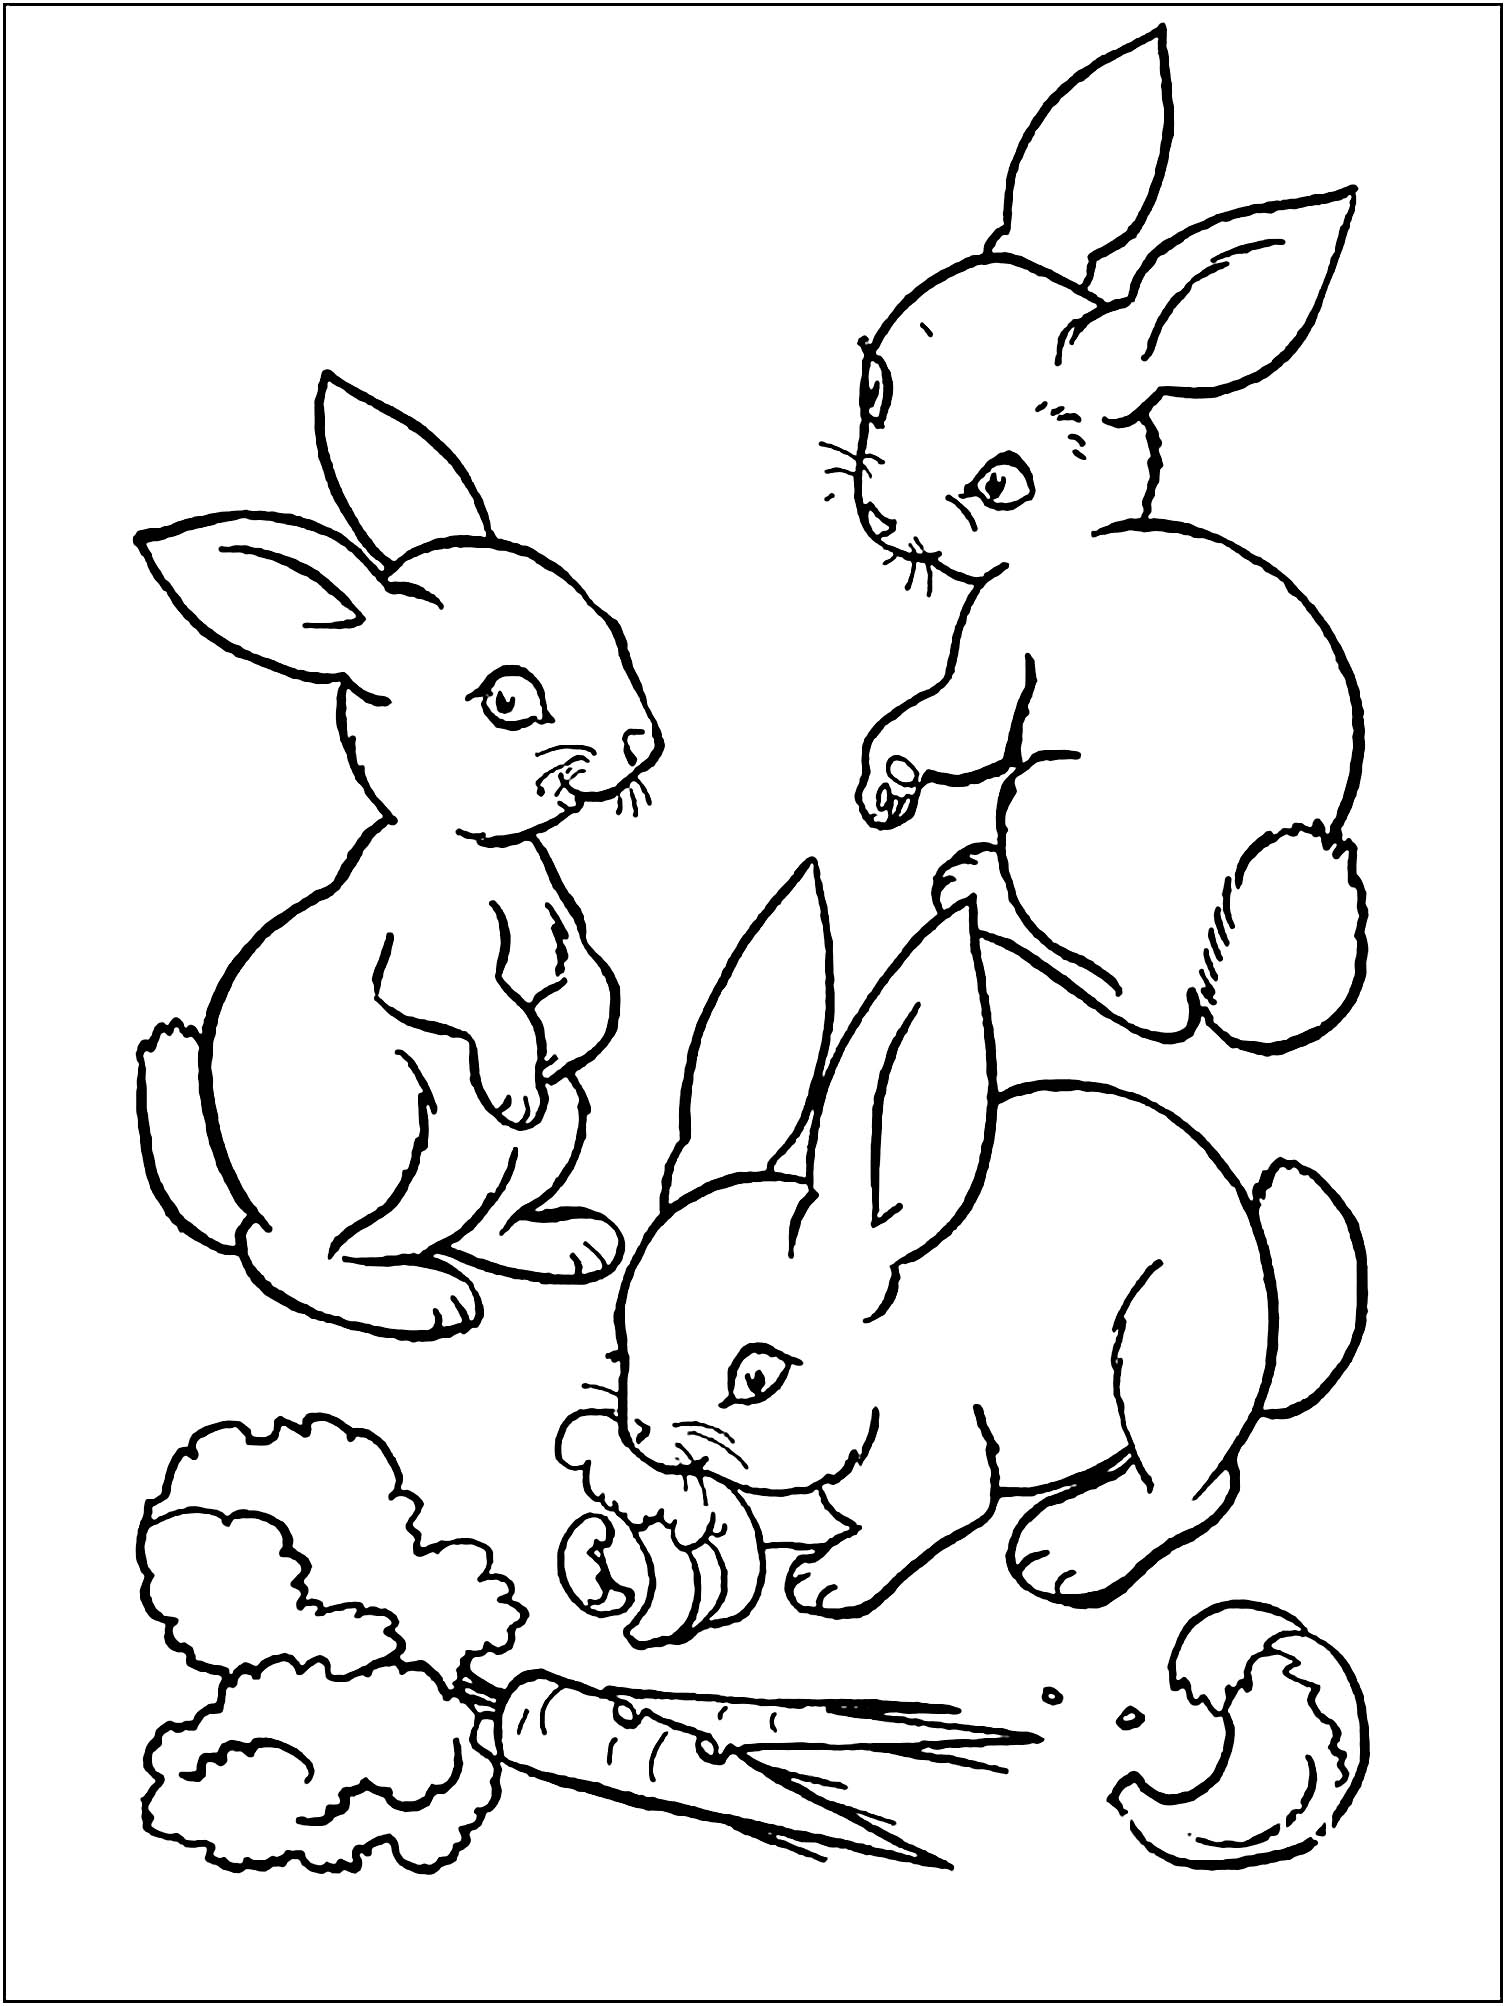 987 Unicorn Cartoon Rabbit Coloring Pages for Adult